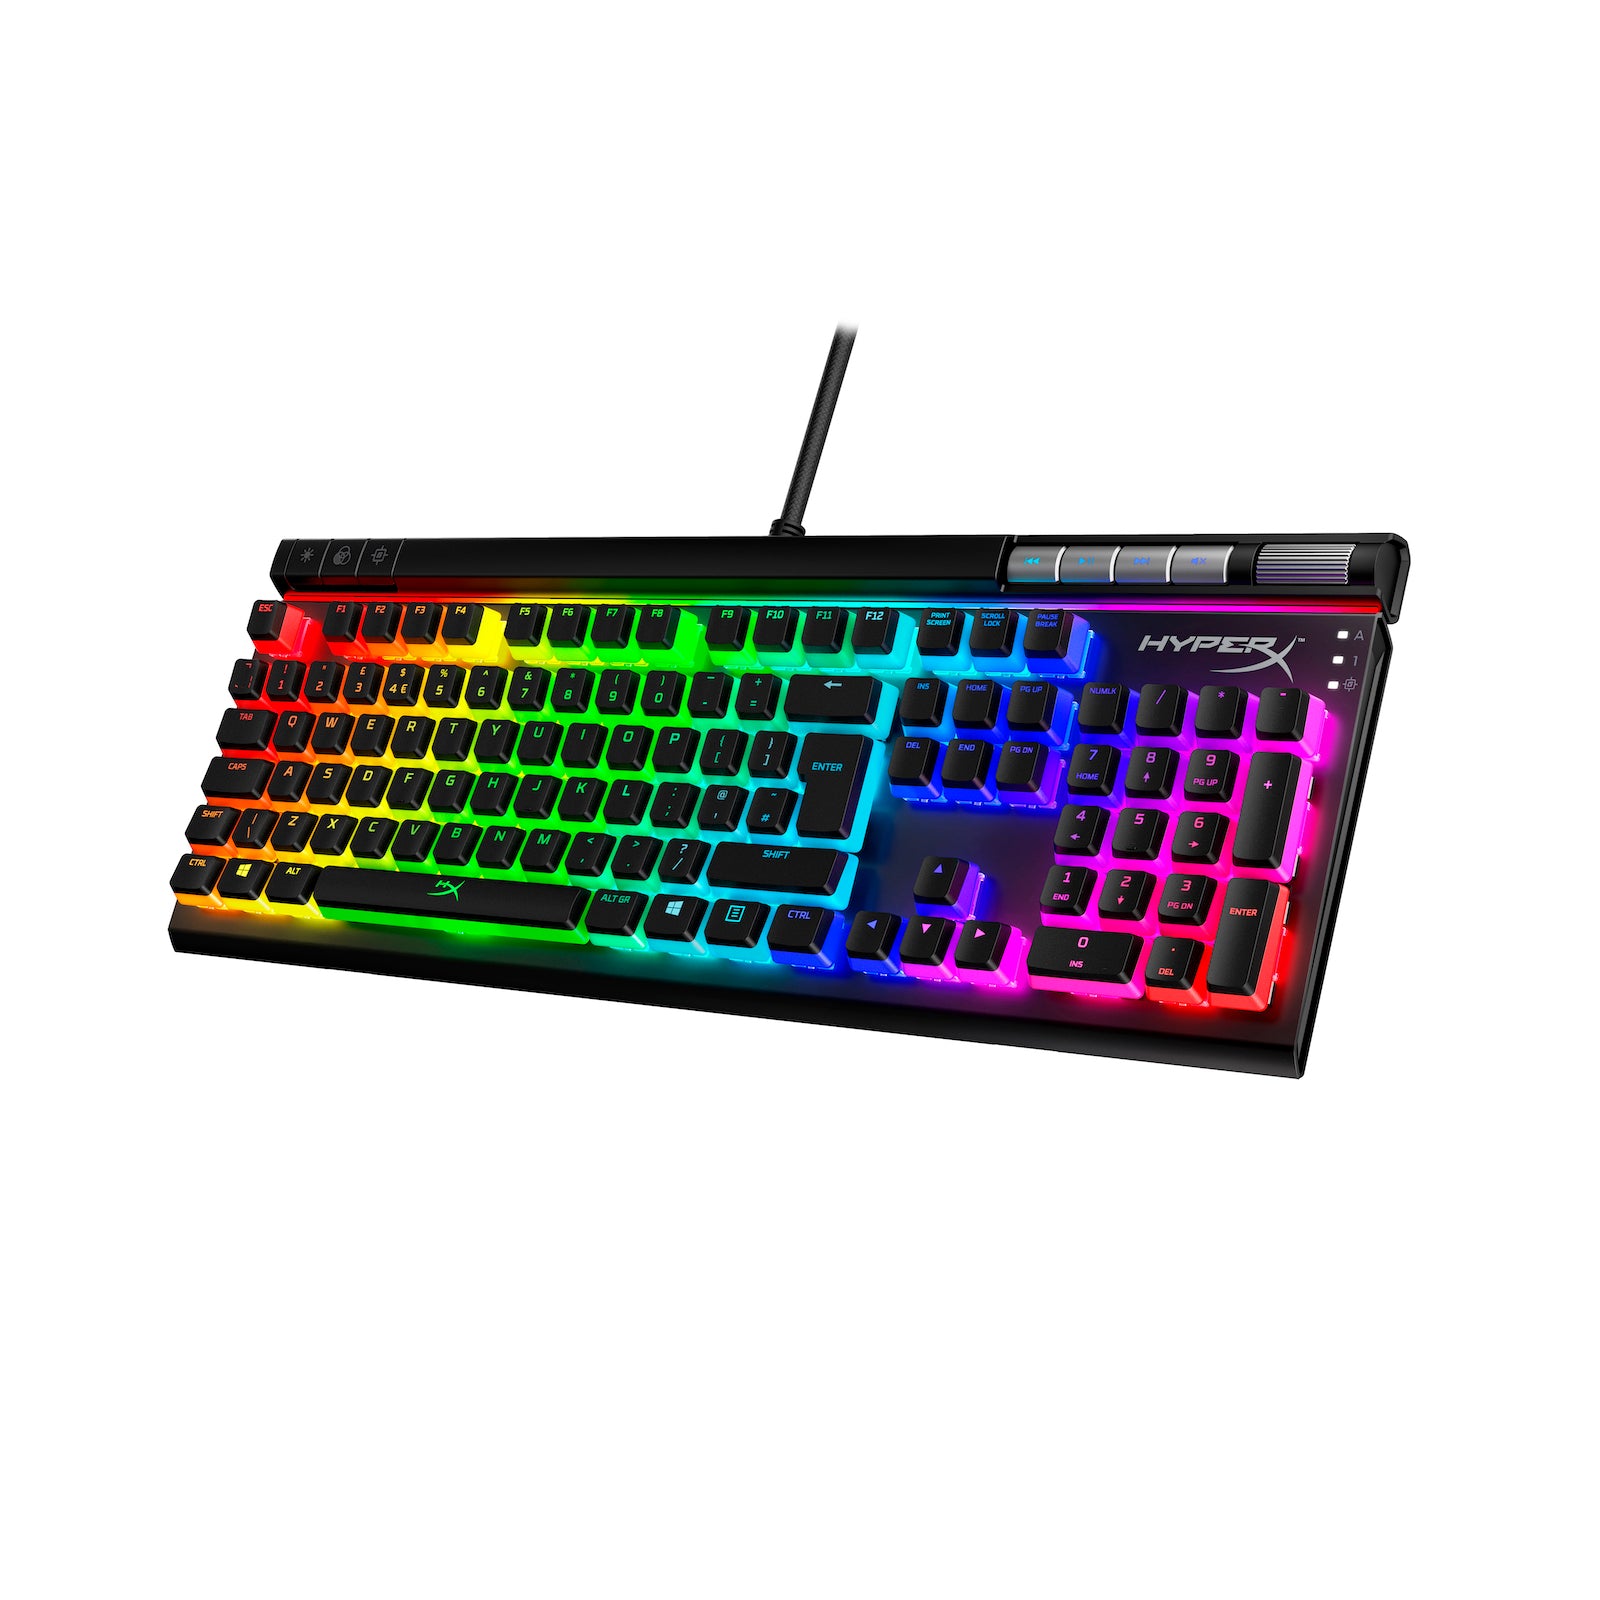 HyperX Pudding Keycaps ABS angled view on keyboard with RGB lighting